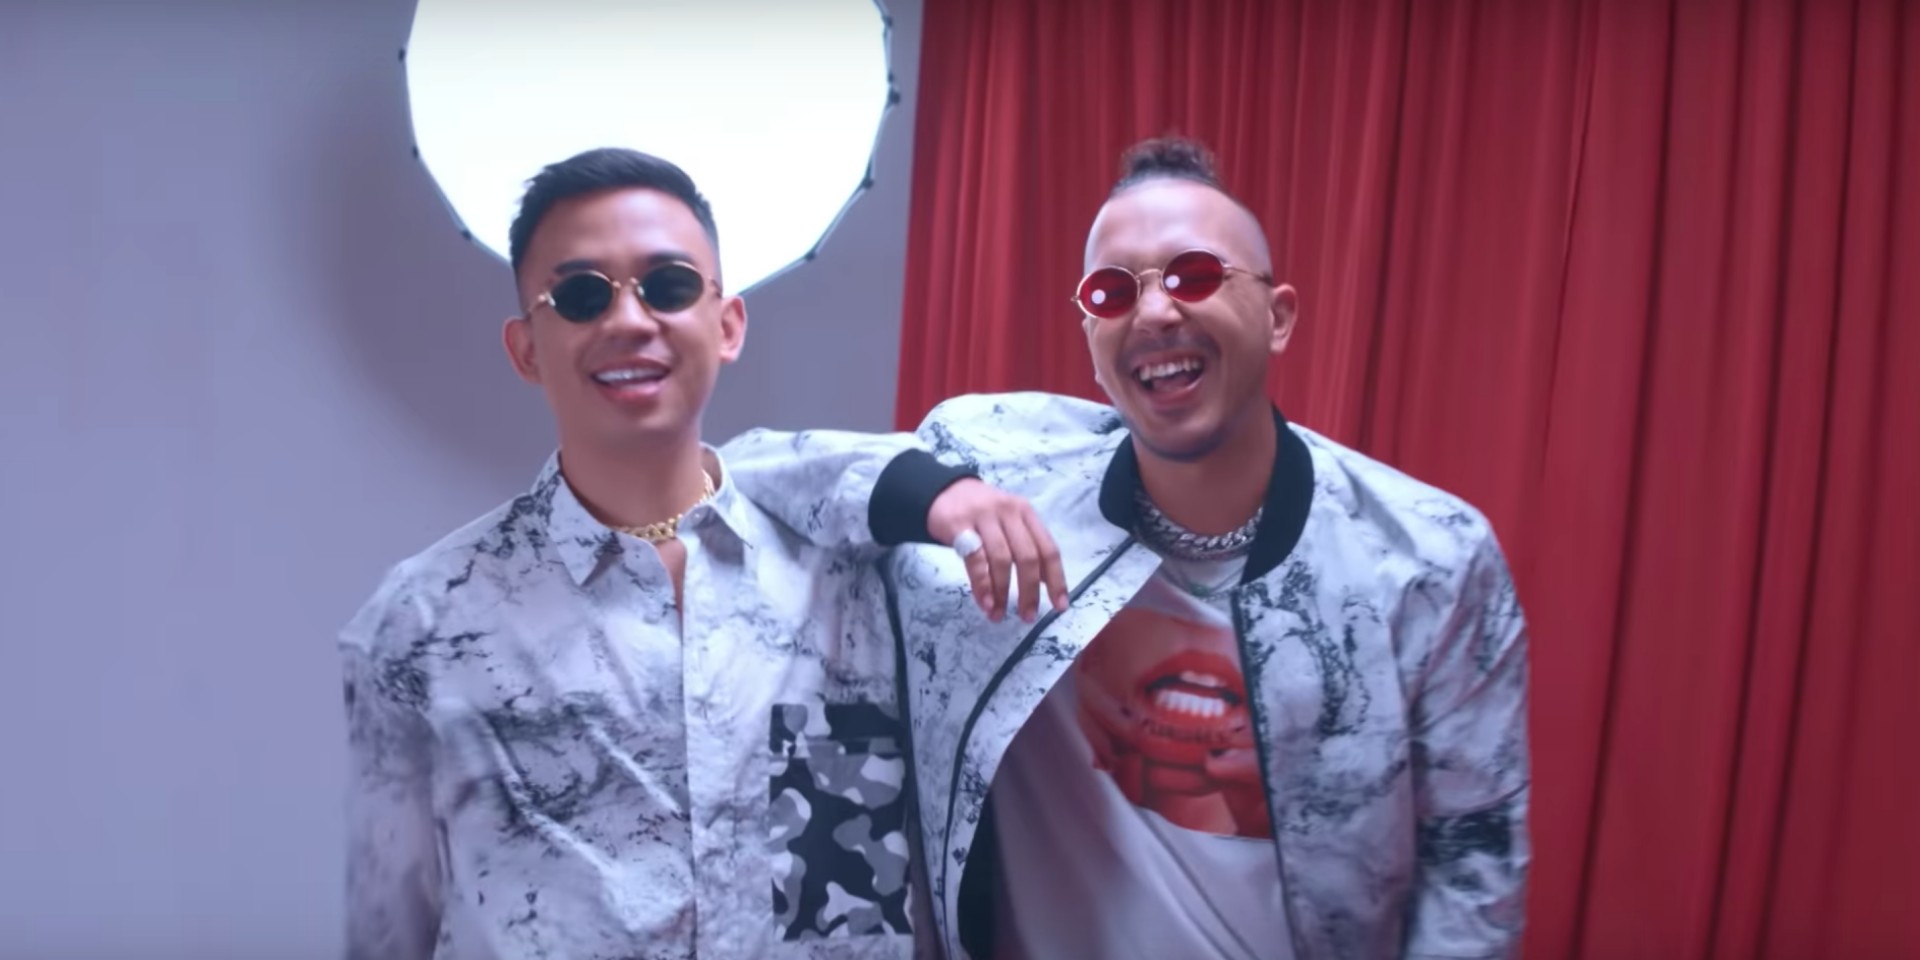 Alif and SonaOne release epic collaborative album DETAIL, share new single and music video, 'Look Around' – watch